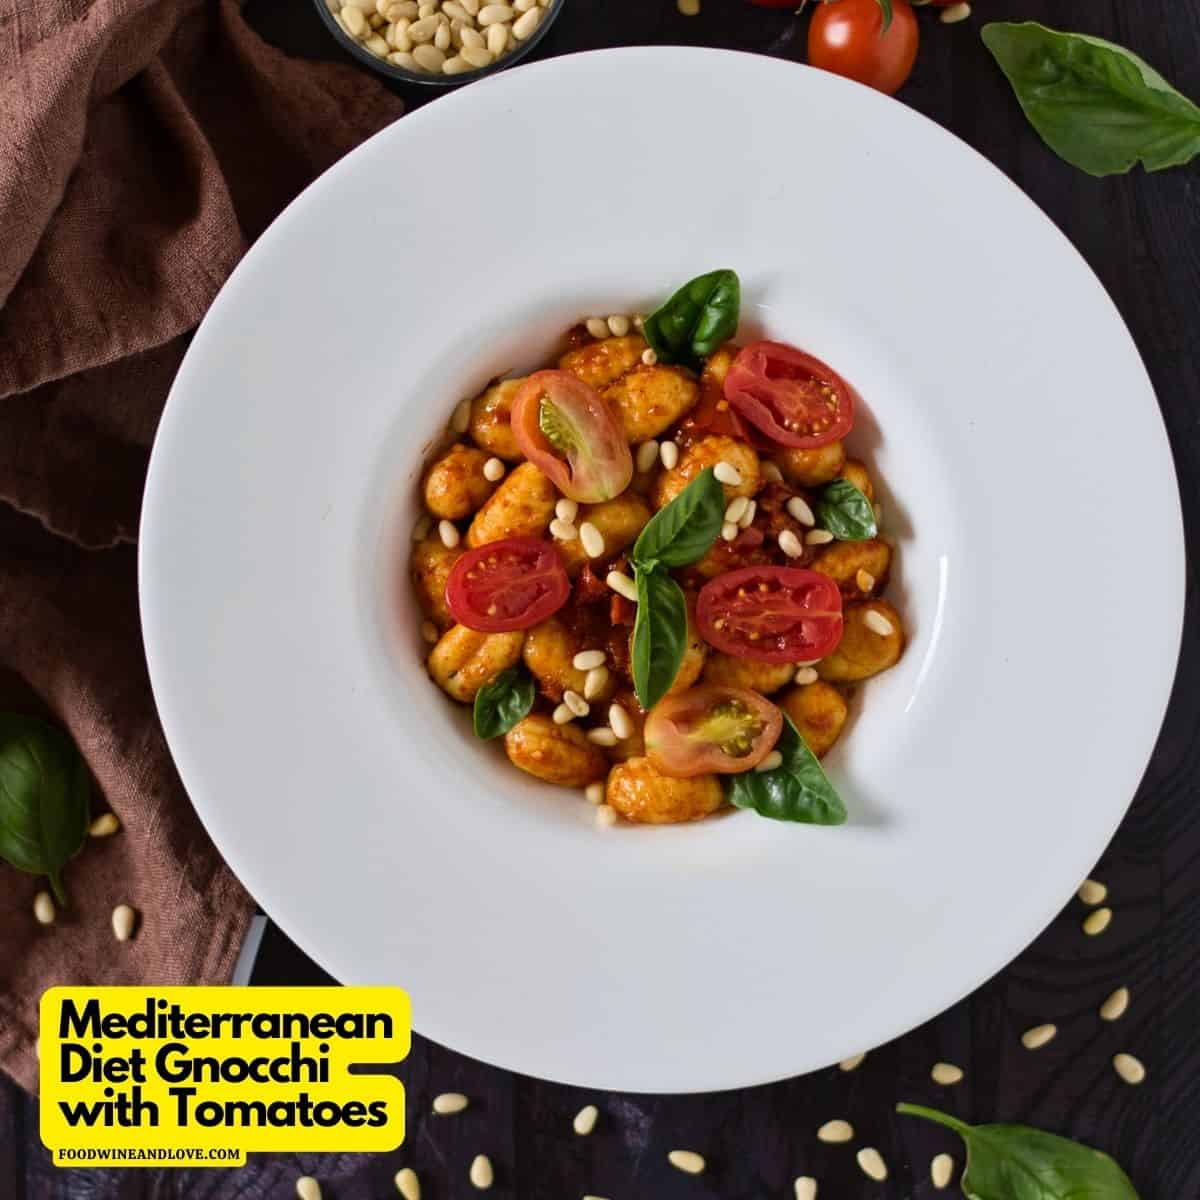 Mediterranean Diet Gnocchi with Tomatoes, a simple and delicious four ingredient flavorful recipe that is vegan diet friendly.